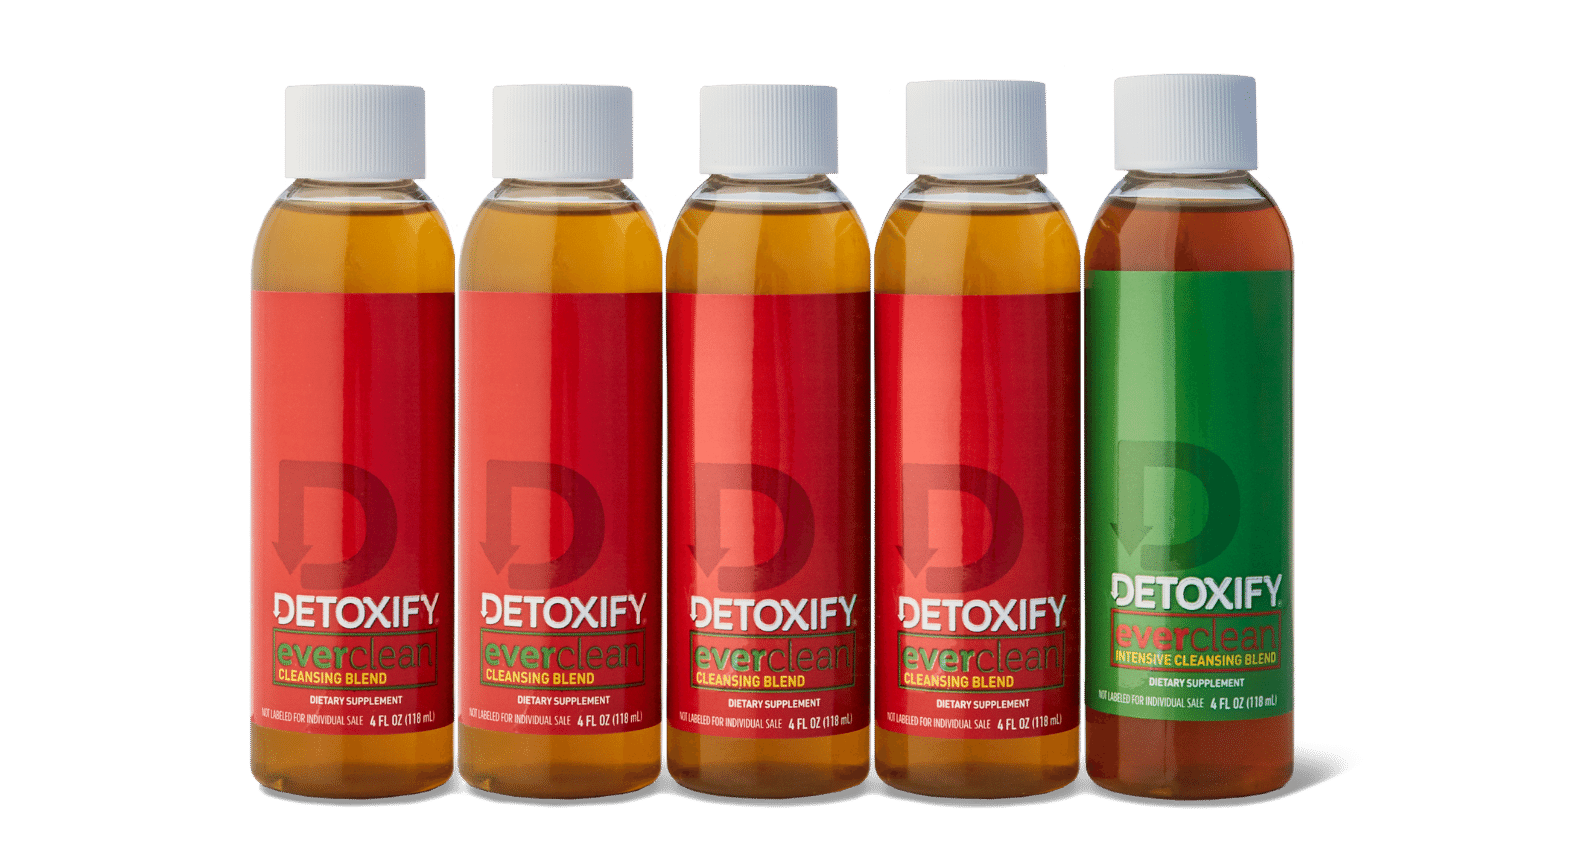 Detoxify Ever Clean is our five-day, long-term herbal cleanse.